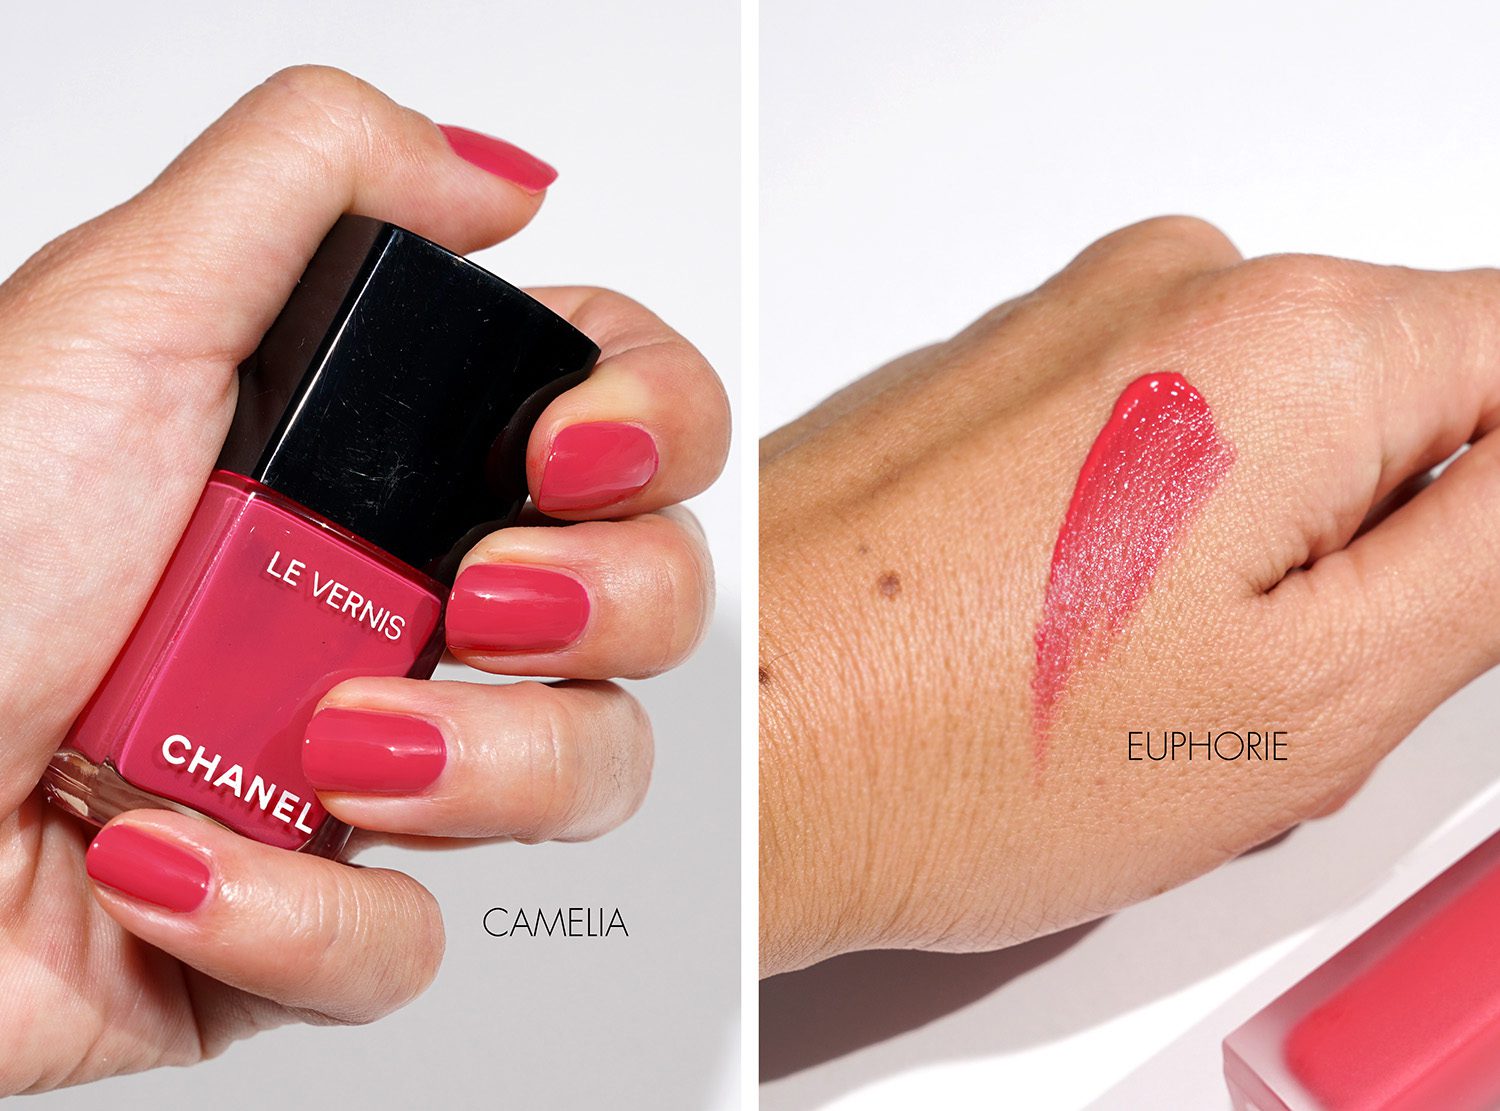 Top 10 Chanel Le Vernis Nail Shades + Lip Colors to Match - The Beauty Look  Book